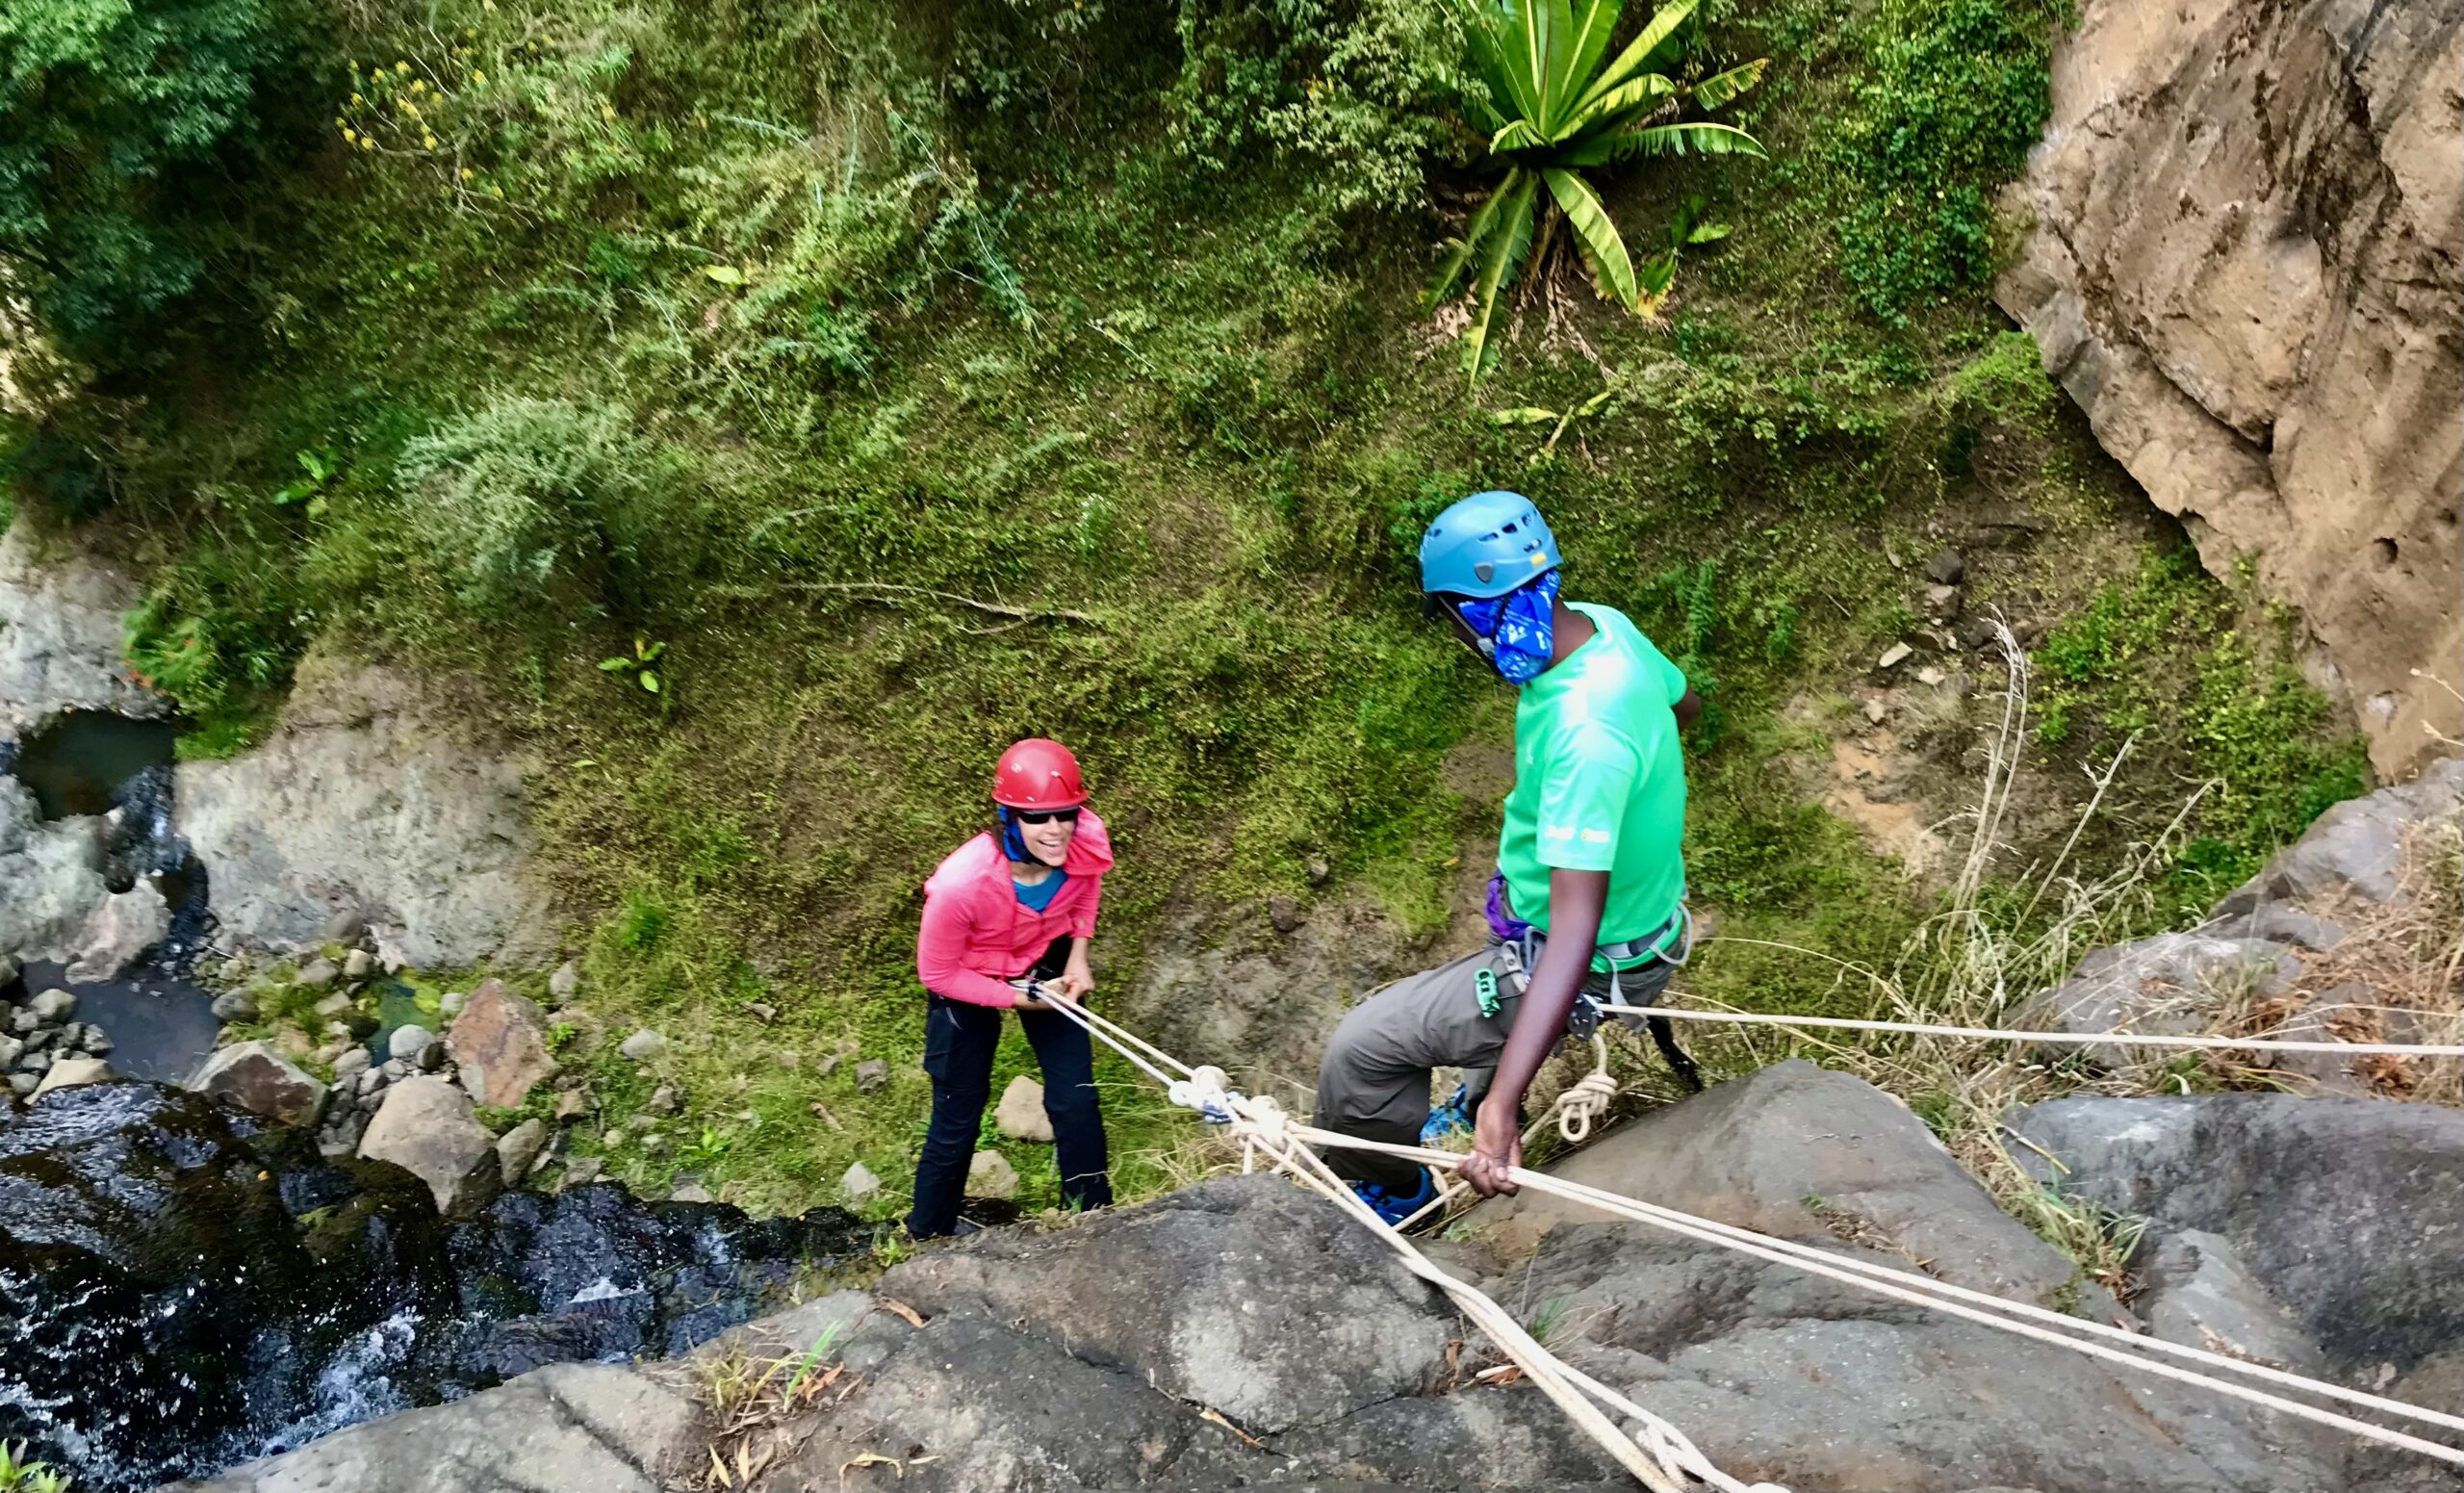 The next big thing in Kenya’s Hiking Scene: Abseiling